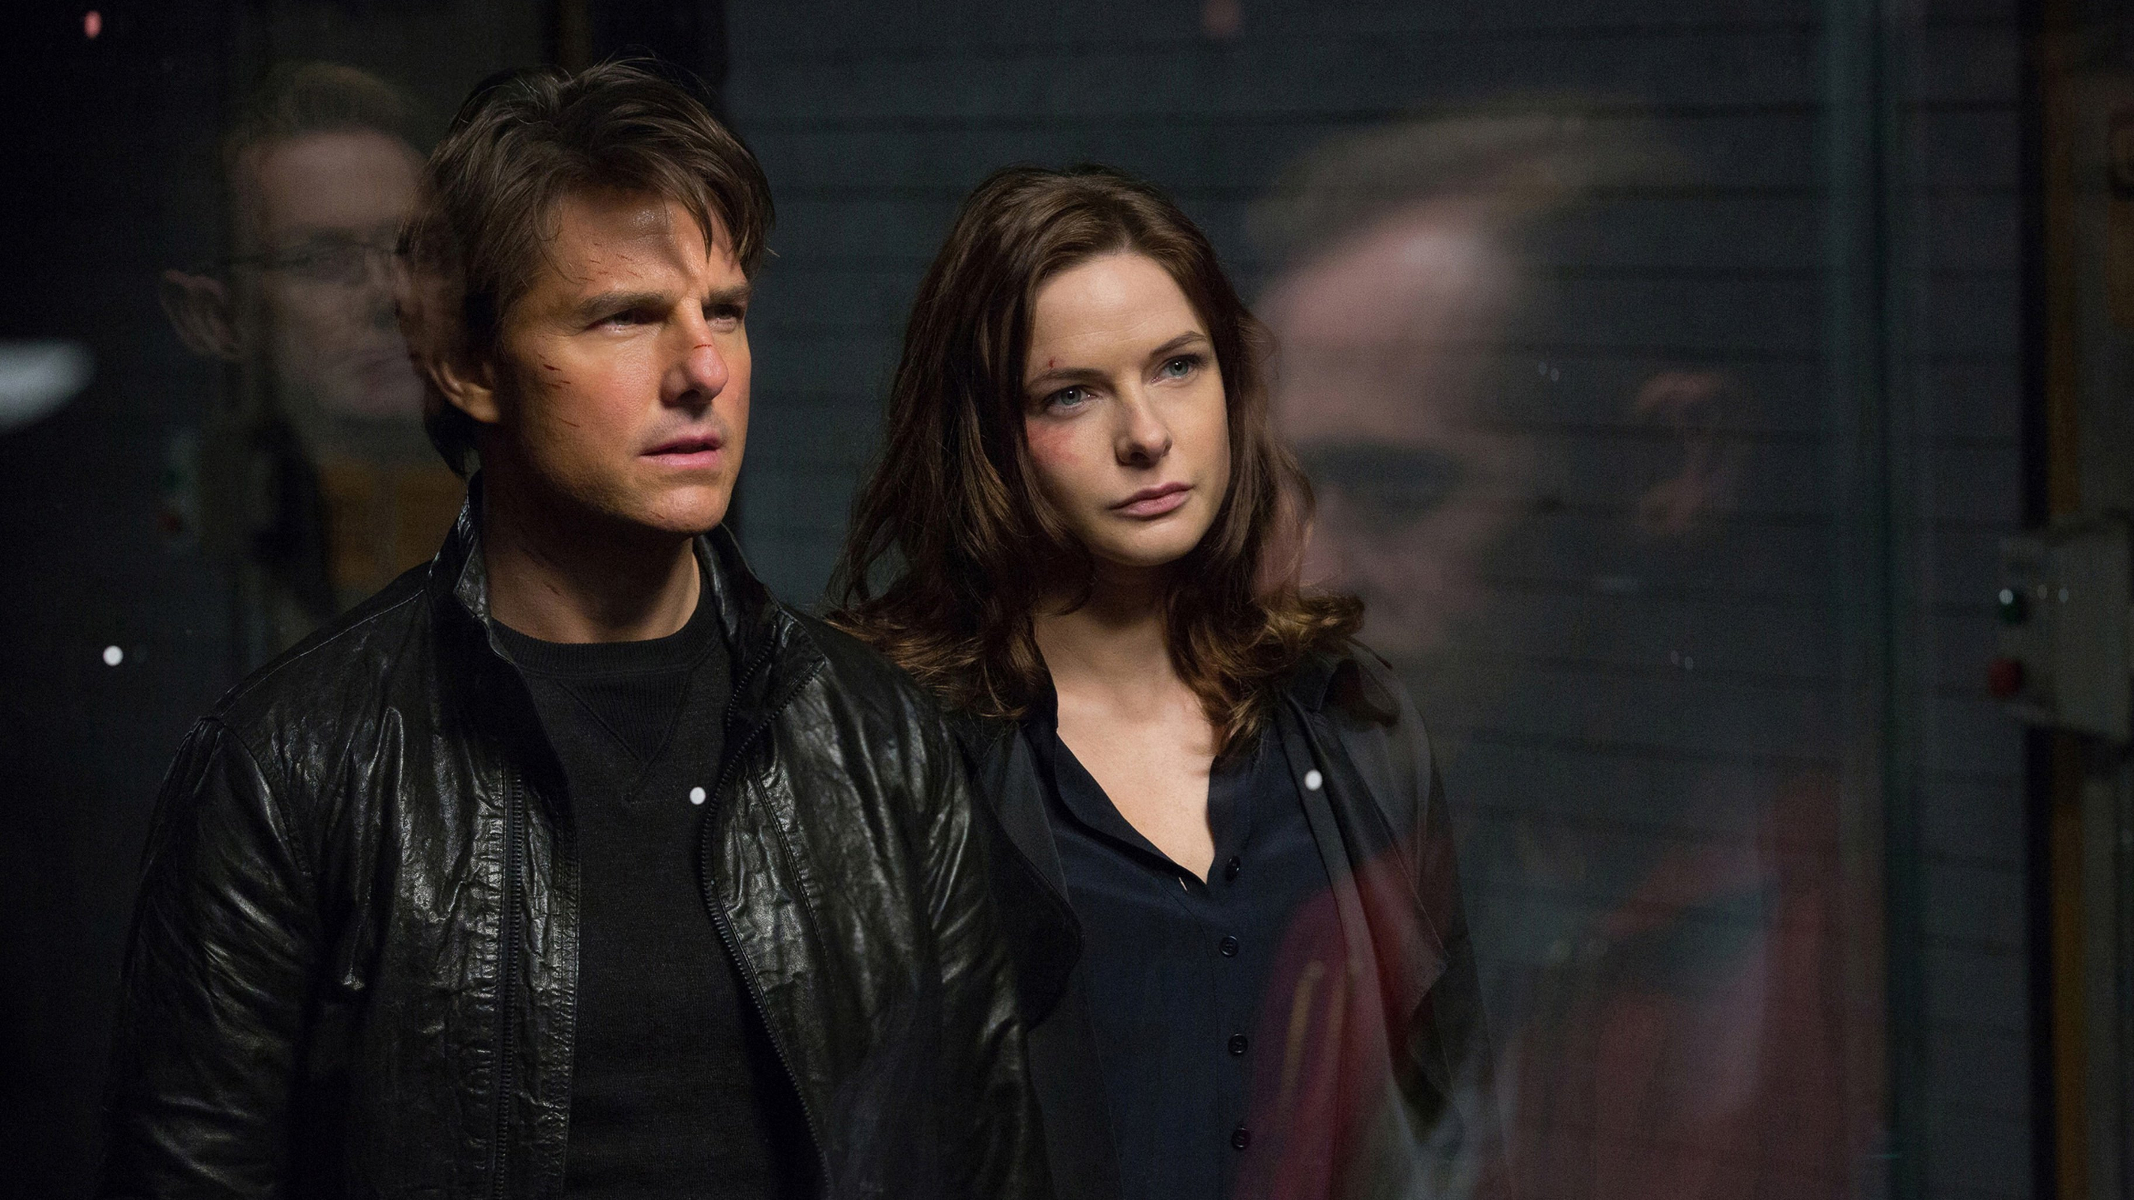 rebecca ferguson, mission: impossible rogue nation, movie, ethan hunt, ilsa faust, tom cruise, mission: impossible 4K